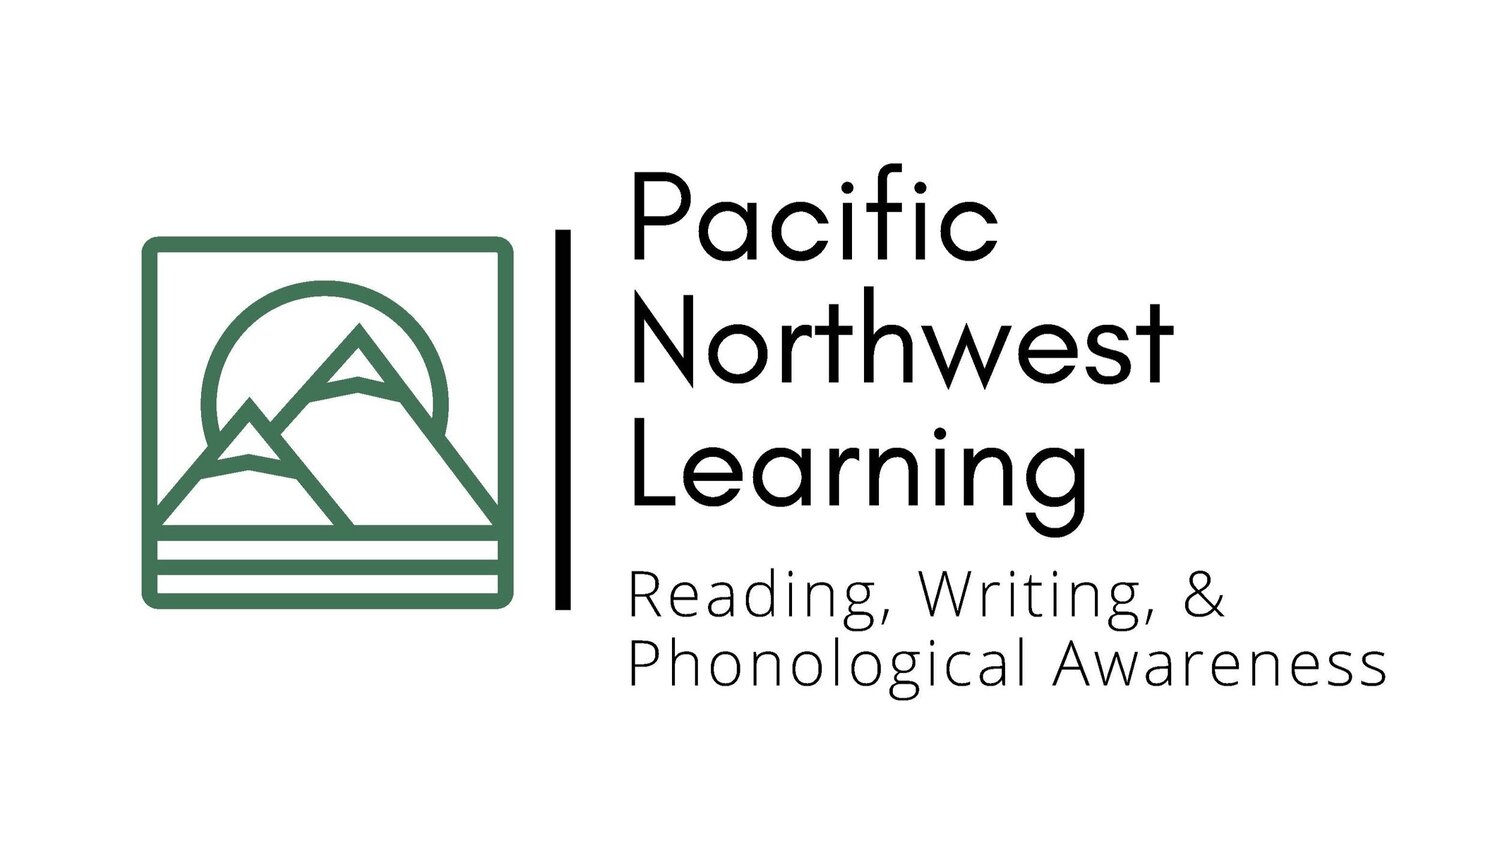 Pacific Northwest Learning